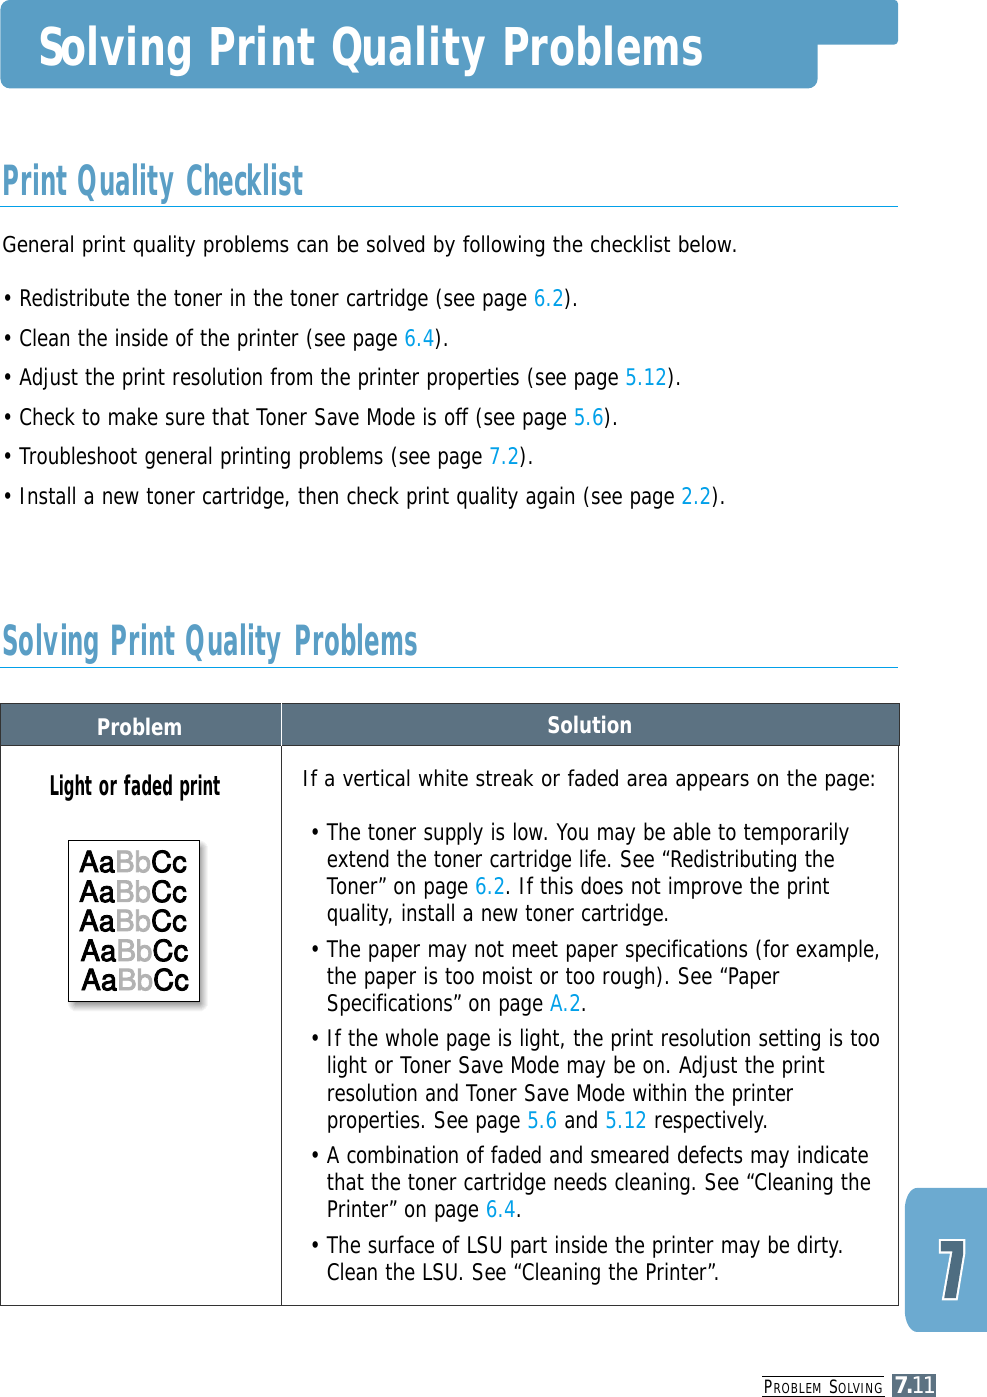 PROBLEM SOLVING7.11Problem SolutionSolving Print Quality ProblemsGeneral print quality problems can be solved by following the checklist below.• Redistribute the toner in the toner cartridge (see page 6.2).• Clean the inside of the printer (see page 6.4).• Adjust the print resolution from the printer properties (see page 5.12).• Check to make sure that Toner Save Mode is off (see page 5.6).• Troubleshoot general printing problems (see page 7.2).• Install a new toner cartridge, then check print quality again (see page 2.2). Print Quality ChecklistSolving Print Quality ProblemsIf a vertical white streak or faded area appears on the page:• The toner supply is low. You may be able to temporarilyextend the toner cartridge life. See “Redistributing theToner” on page 6.2. If this does not improve the printquality, install a new toner cartridge.• The paper may not meet paper specifications (for example,the paper is too moist or too rough). See “PaperSpecifications” on page A.2.• If the whole page is light, the print resolution setting is toolight or Toner Save Mode may be on. Adjust the printresolution and Toner Save Mode within the printerproperties. See page 5.6 and 5.12 respectively.• A combination of faded and smeared defects may indicatethat the toner cartridge needs cleaning. See “Cleaning thePrinter” on page 6.4.• The surface of LSU part inside the printer may be dirty.Clean the LSU. See “Cleaning the Printer”.Light or faded printAaBbCcAaBbCcAaBbCcAaBbCcAaBbCcAaBbCcAaBbCcAaBbCcAaBbCcAaBbCc